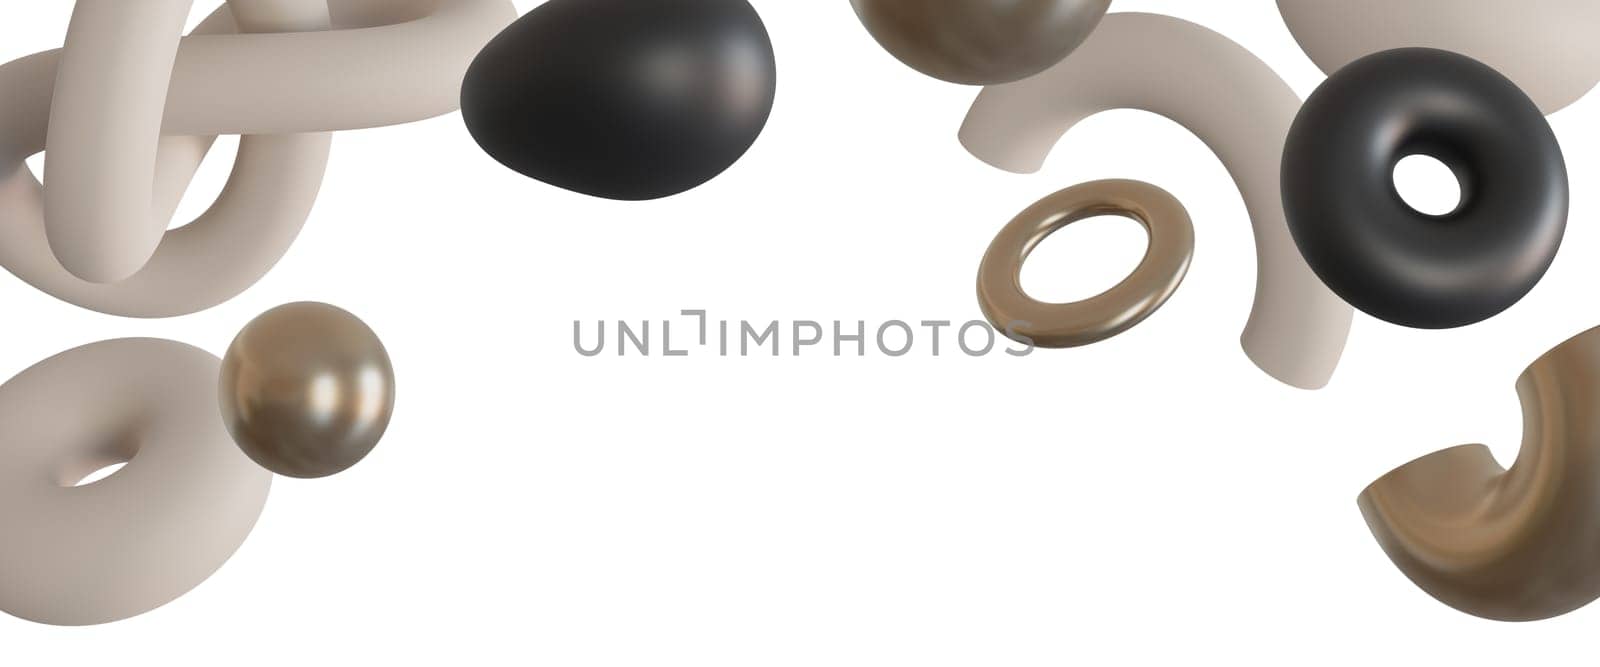 Elegant, minimalistic header with abstract, floating black, beige and metallic 3D shapes, isolated on white background. Modern border. Neutral tones. Top of the sheet. Foreground. 3D render. by creativebird